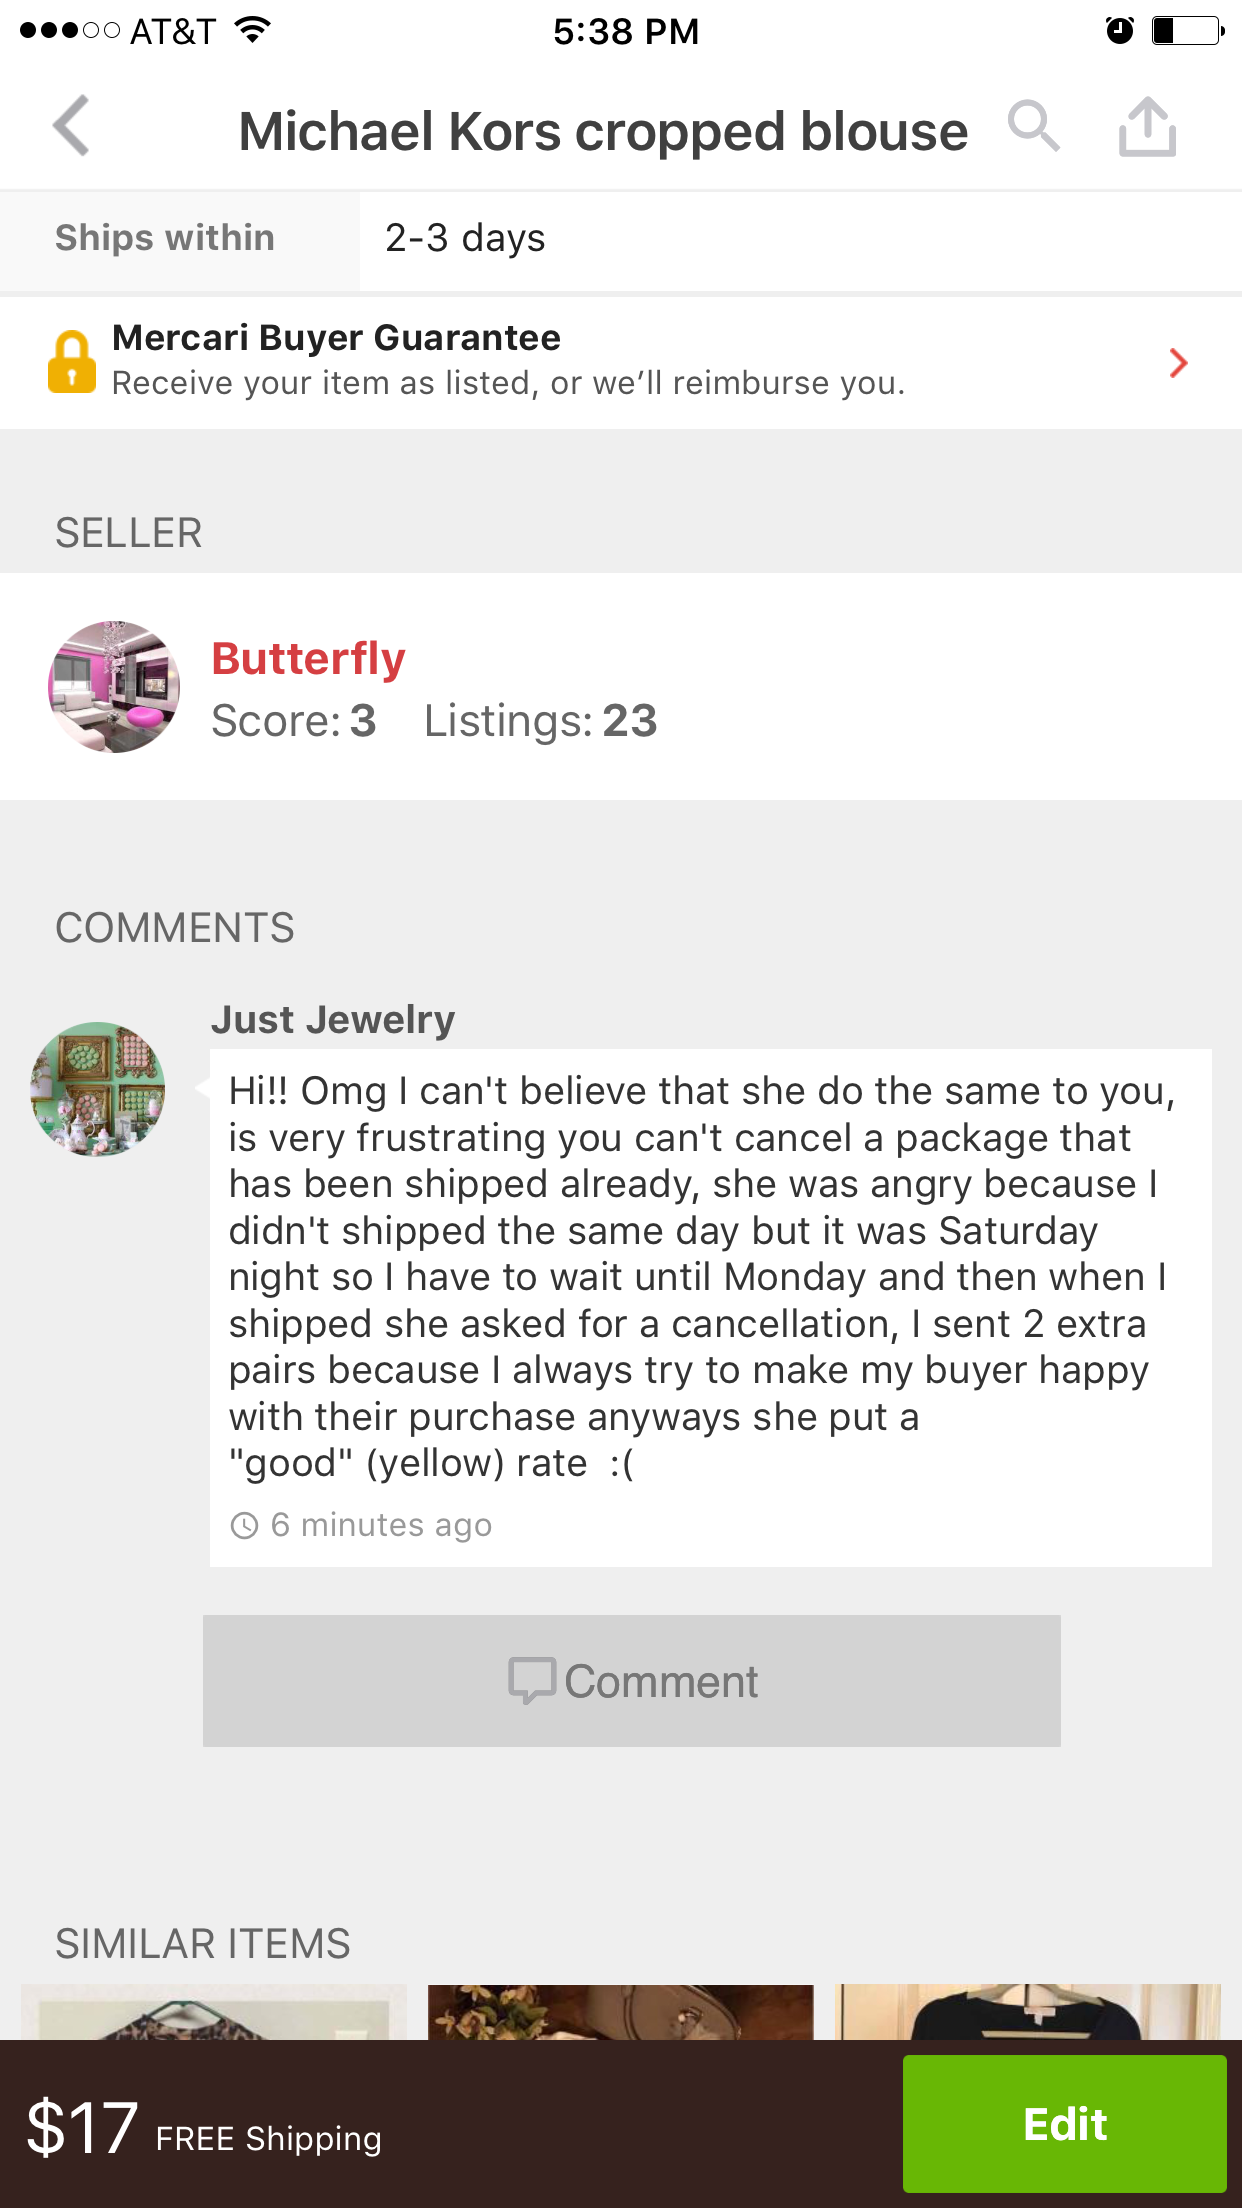 This is the message of another seller 